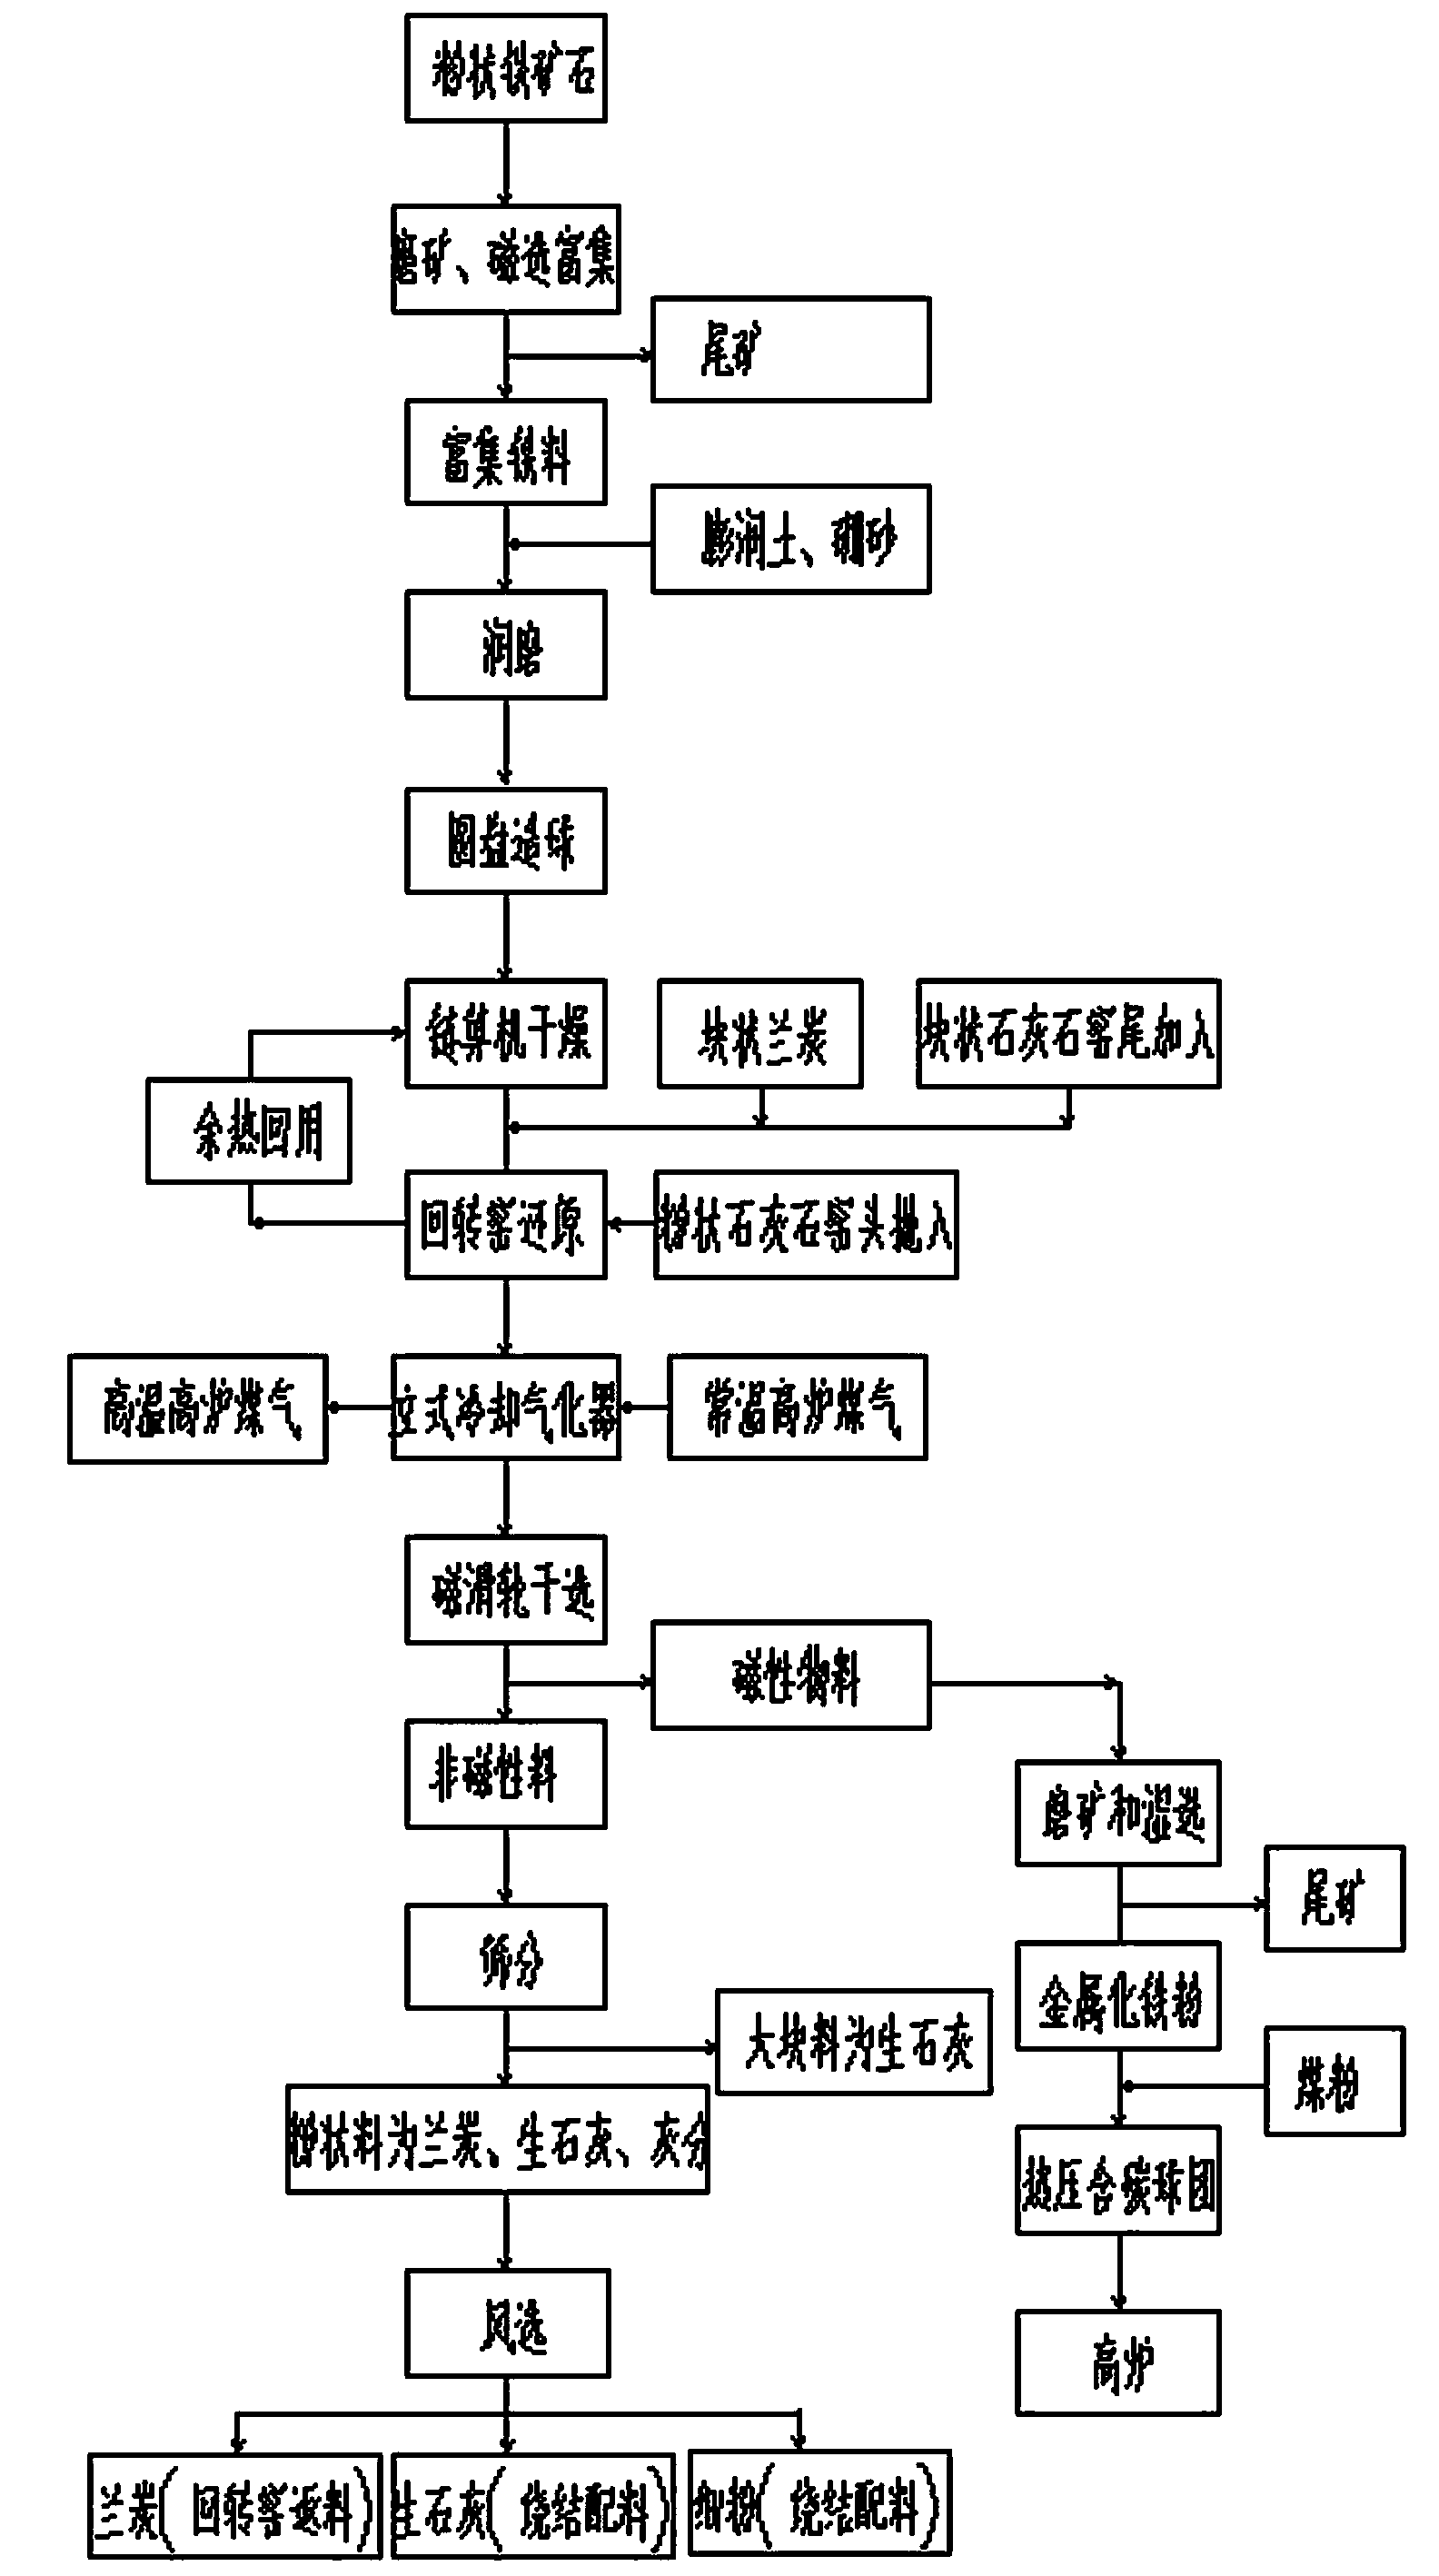 Method for producing metallized iron powder based on carbon circulation oxygen increasing direct reduction of powdery iron ore